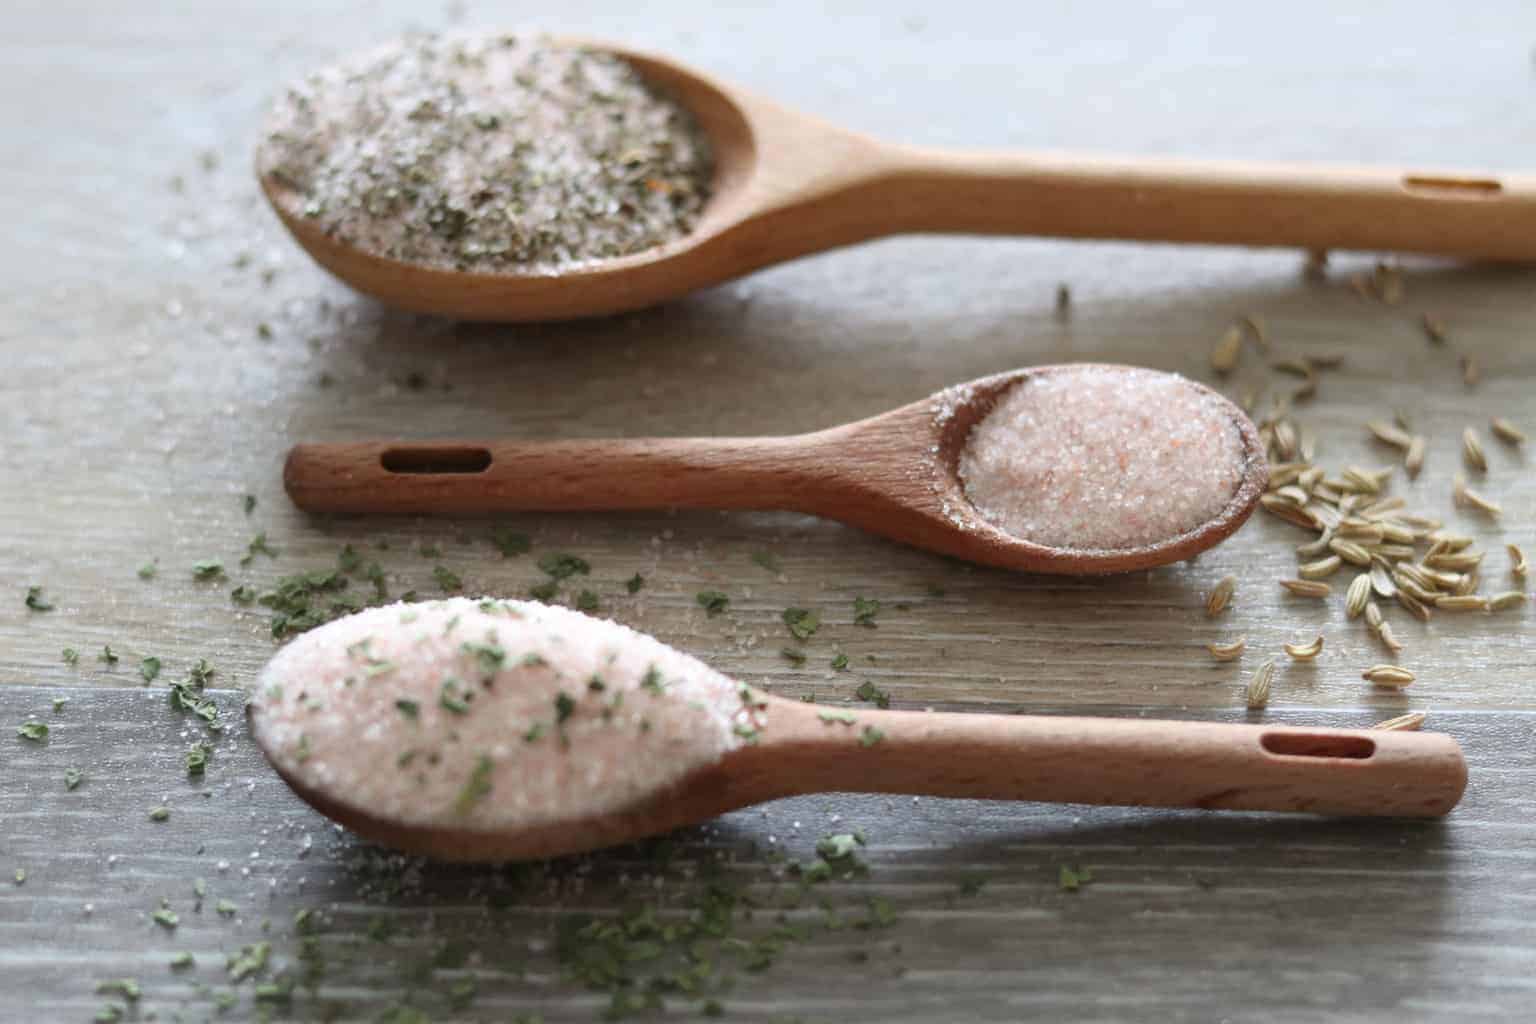 Wooden spoons filled with seasoned salts.